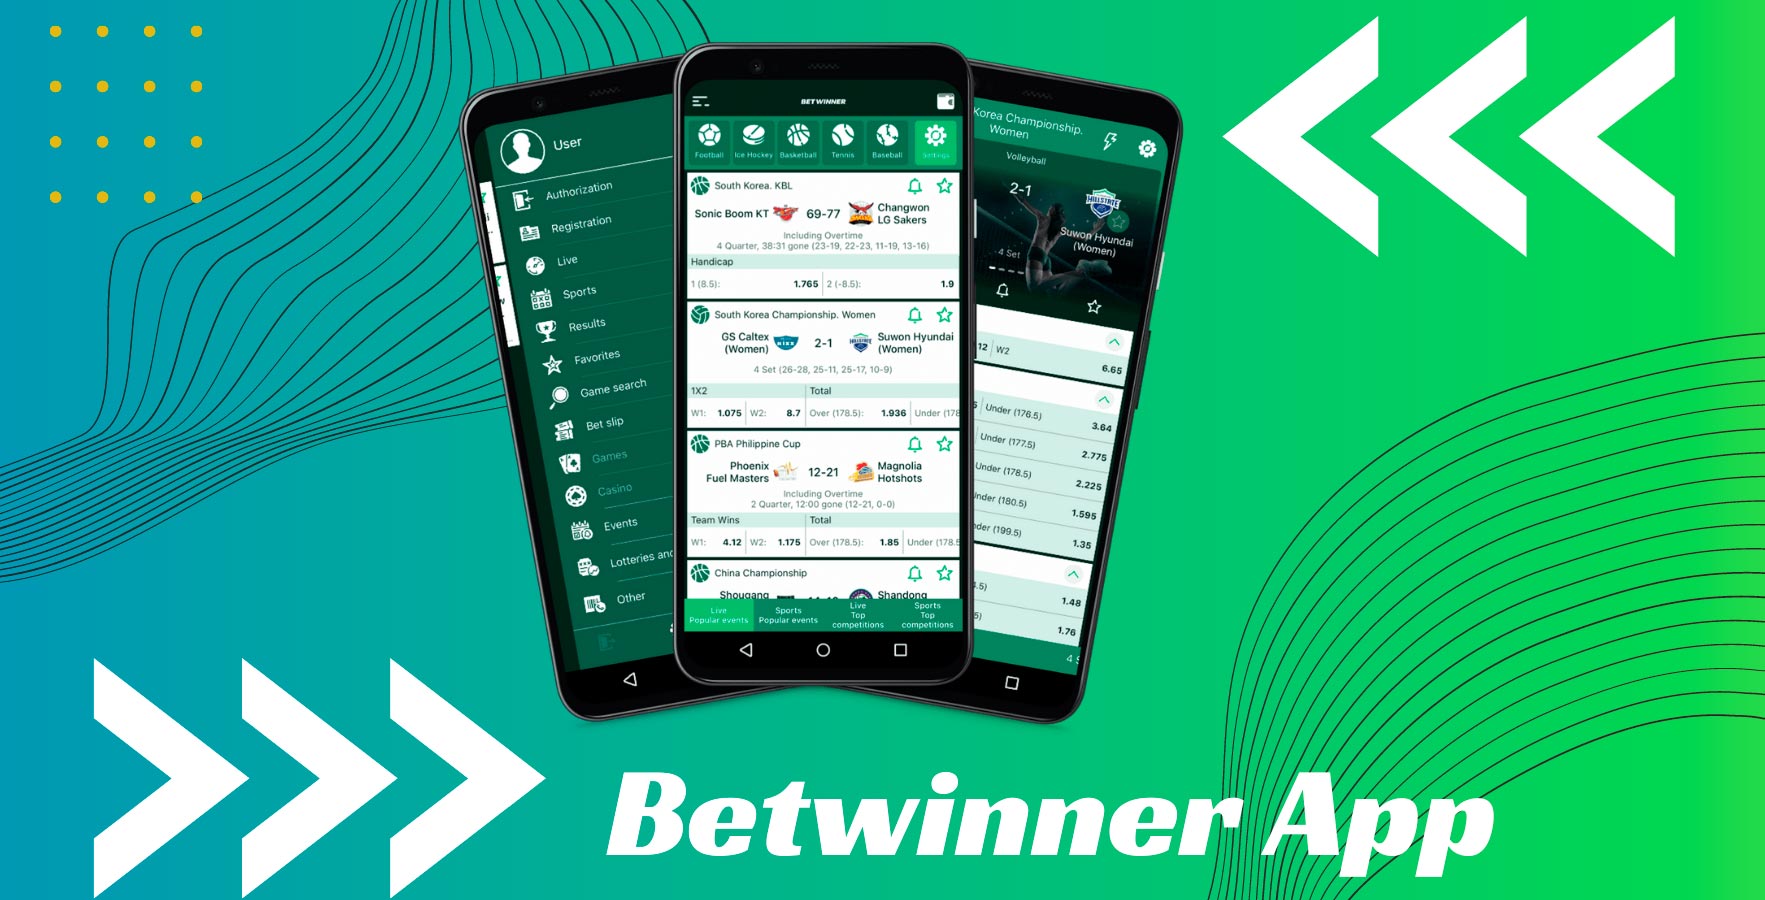 The betting app betwinner was known for its bonuses